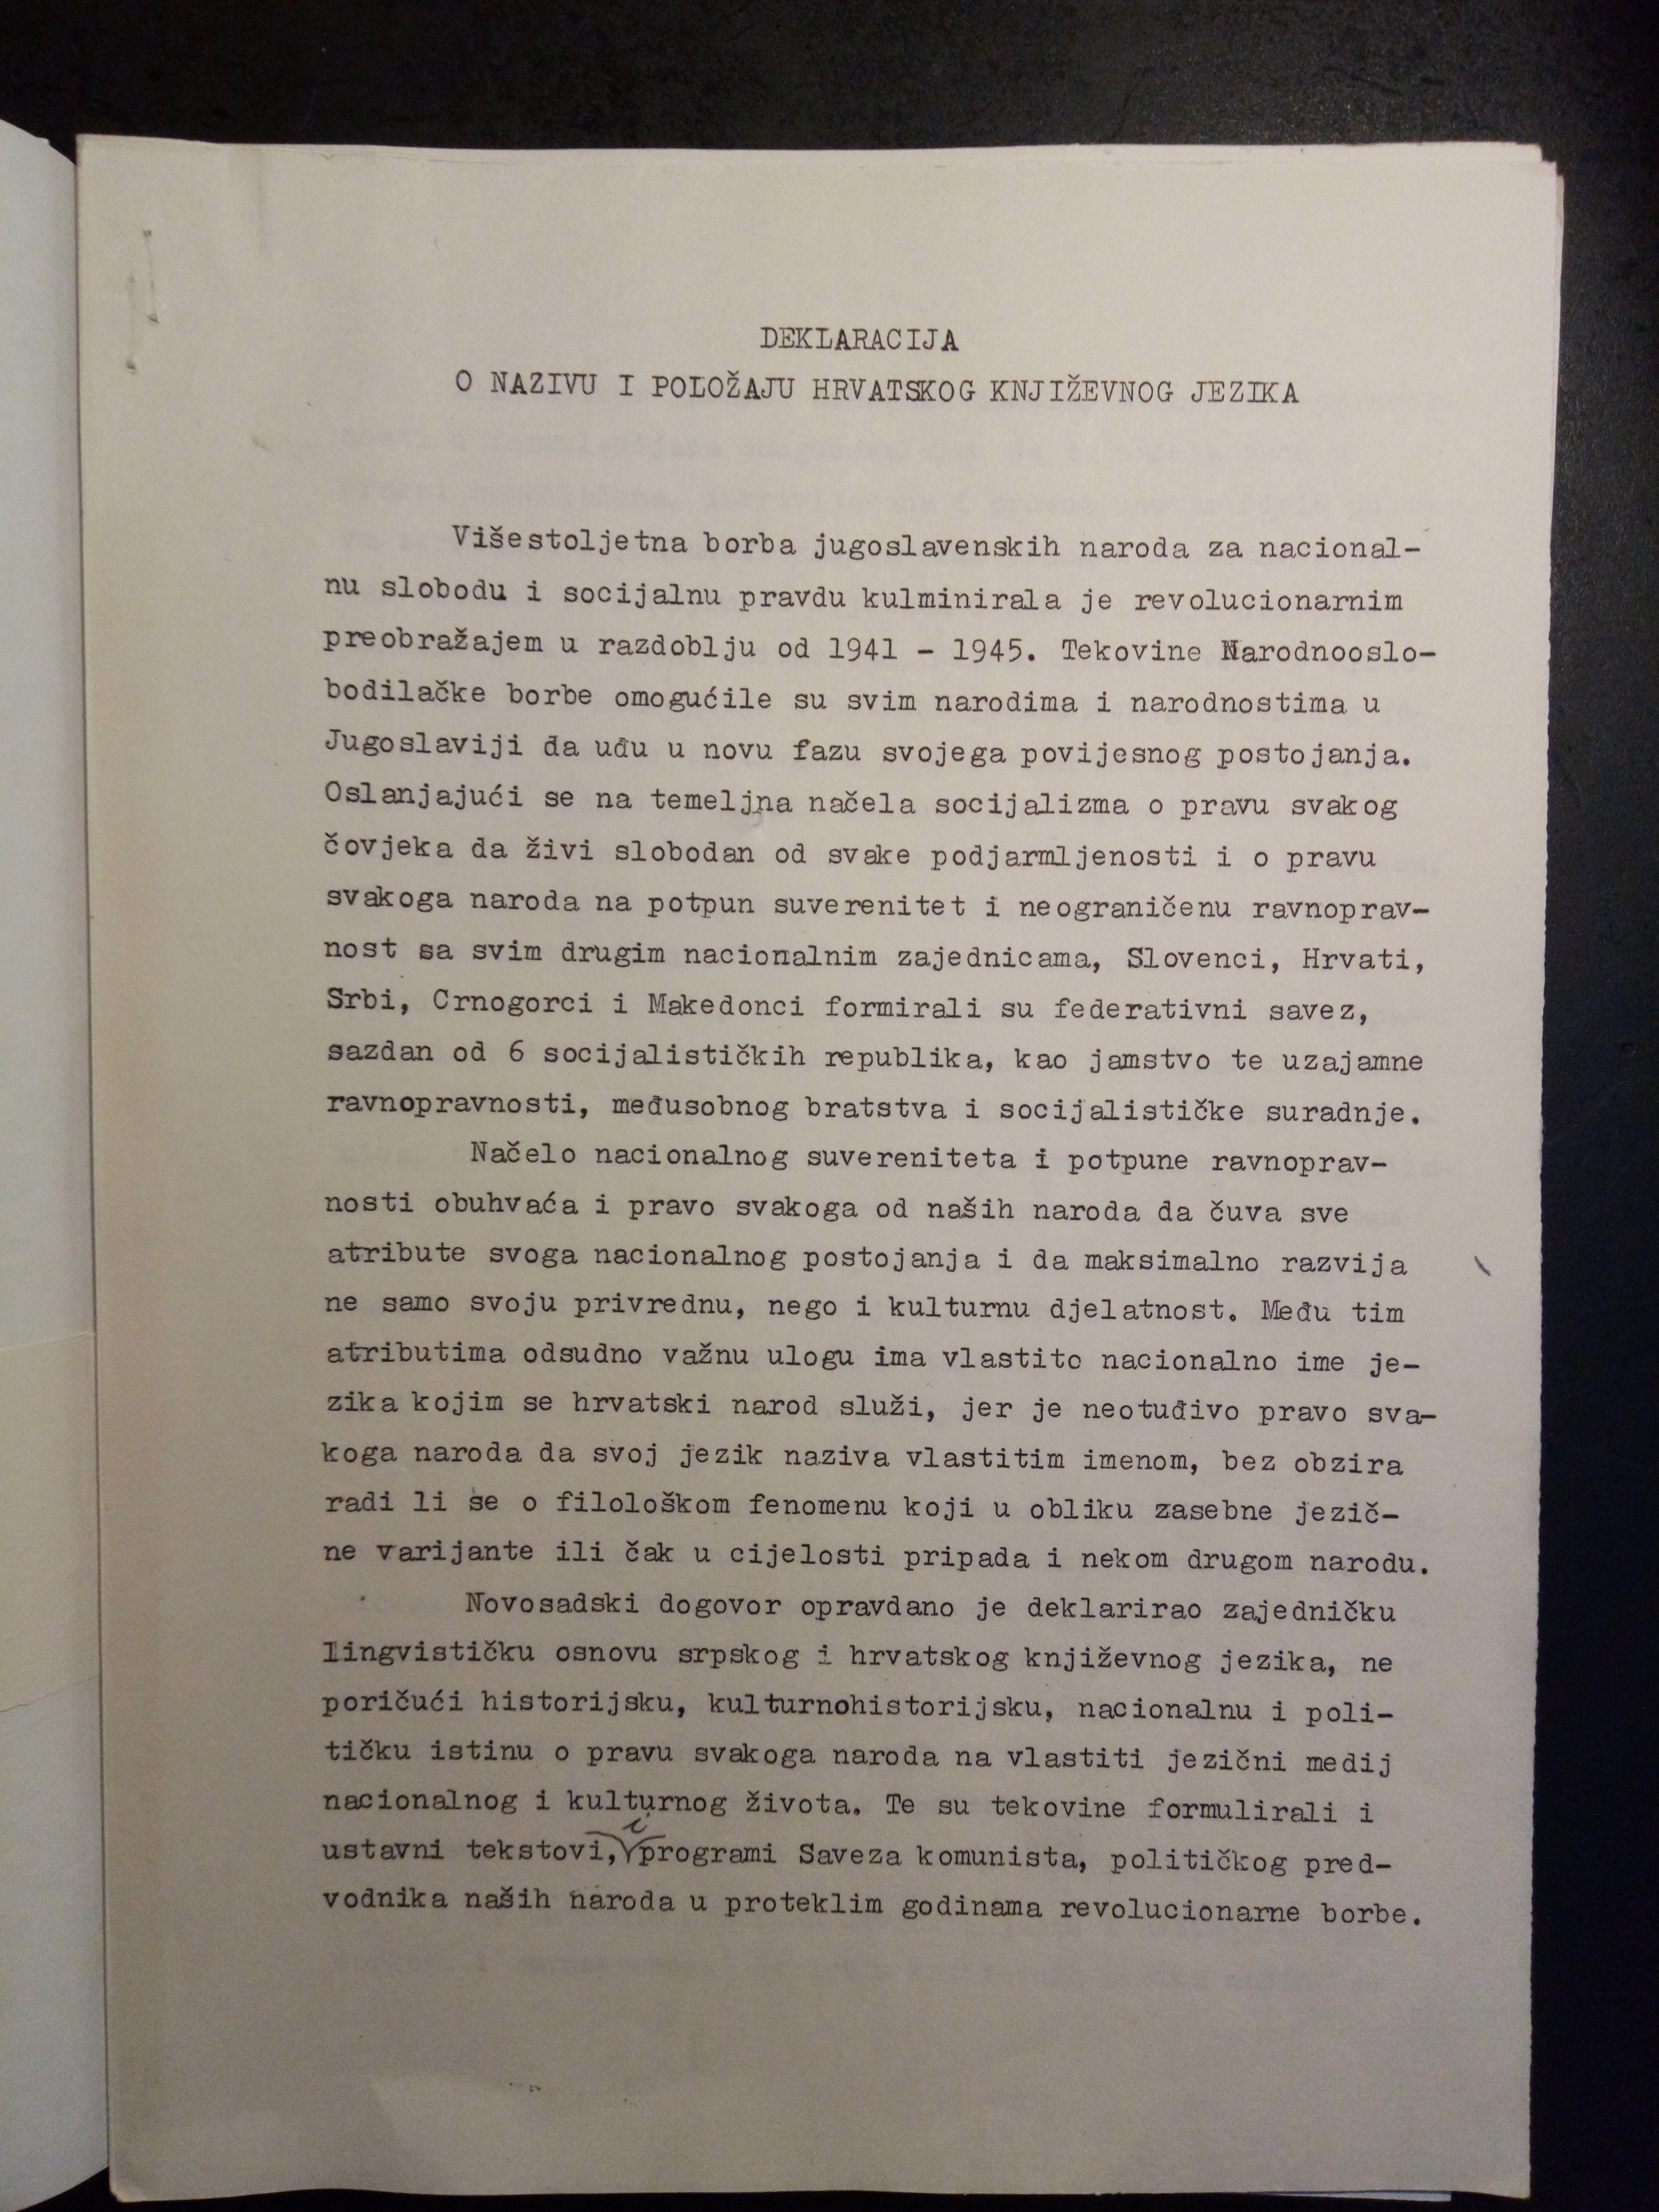 Declaration on the Name and Status of Croatian Language, 1967. Typescript.Matica hrvatska Collection, Croatian State Archives